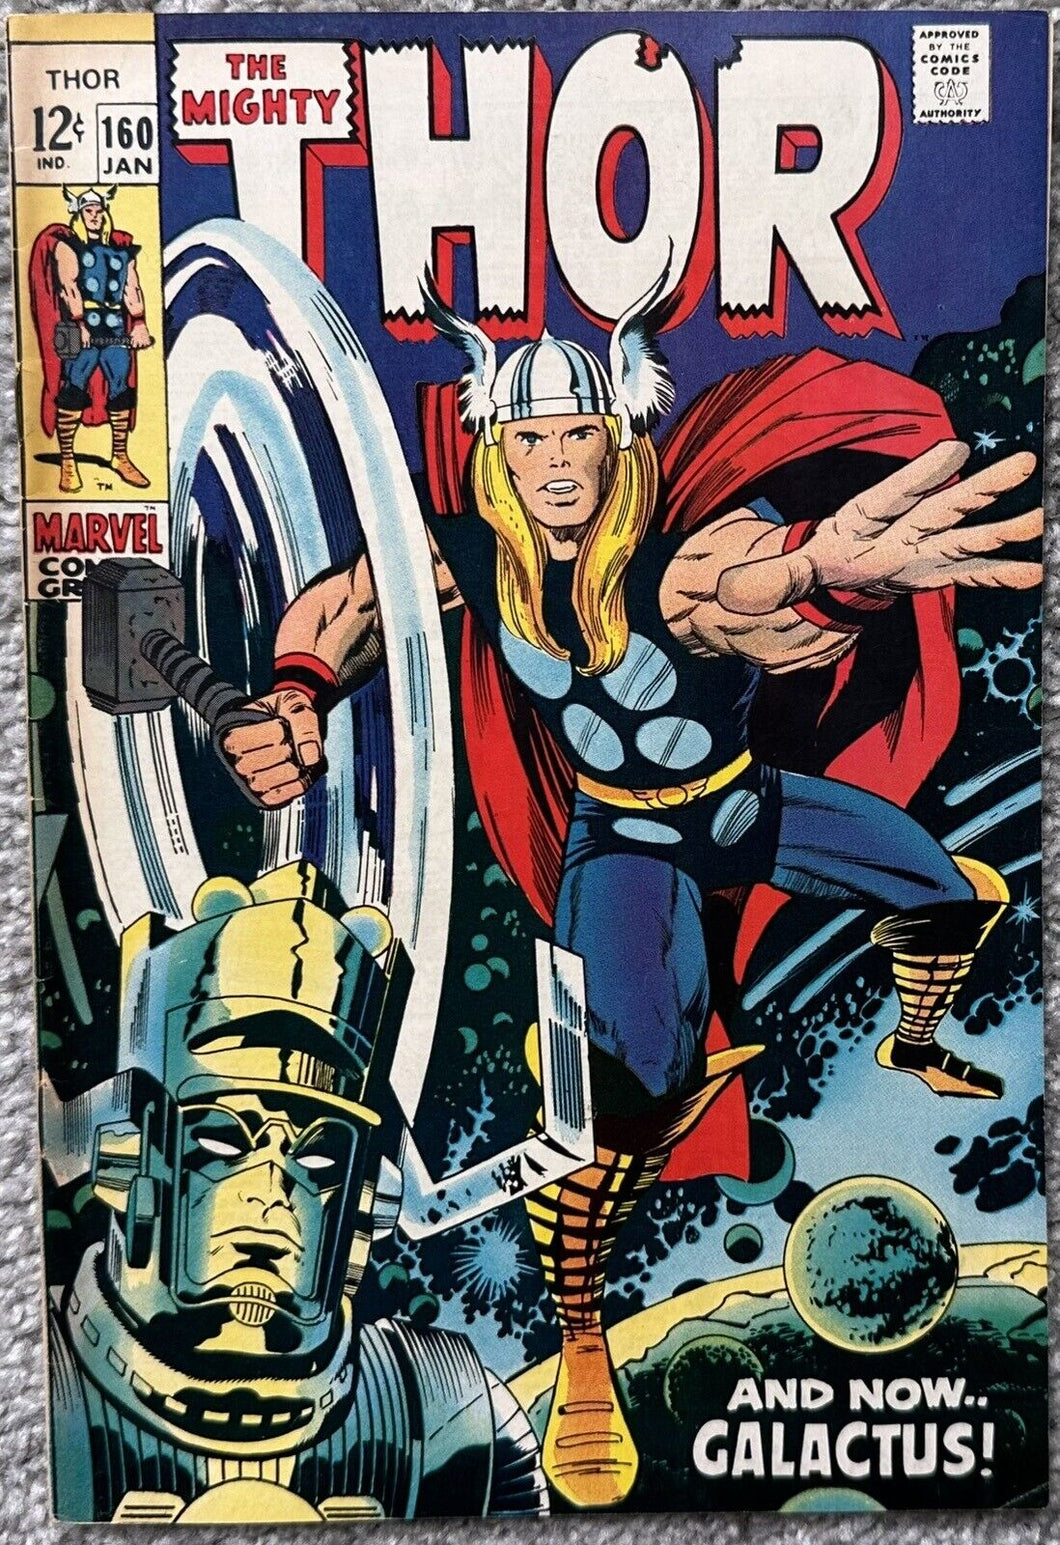 THE MIGHTY THOR #160 (MARVEL,1969) GALACTUS VS. EGO SILVER AGE